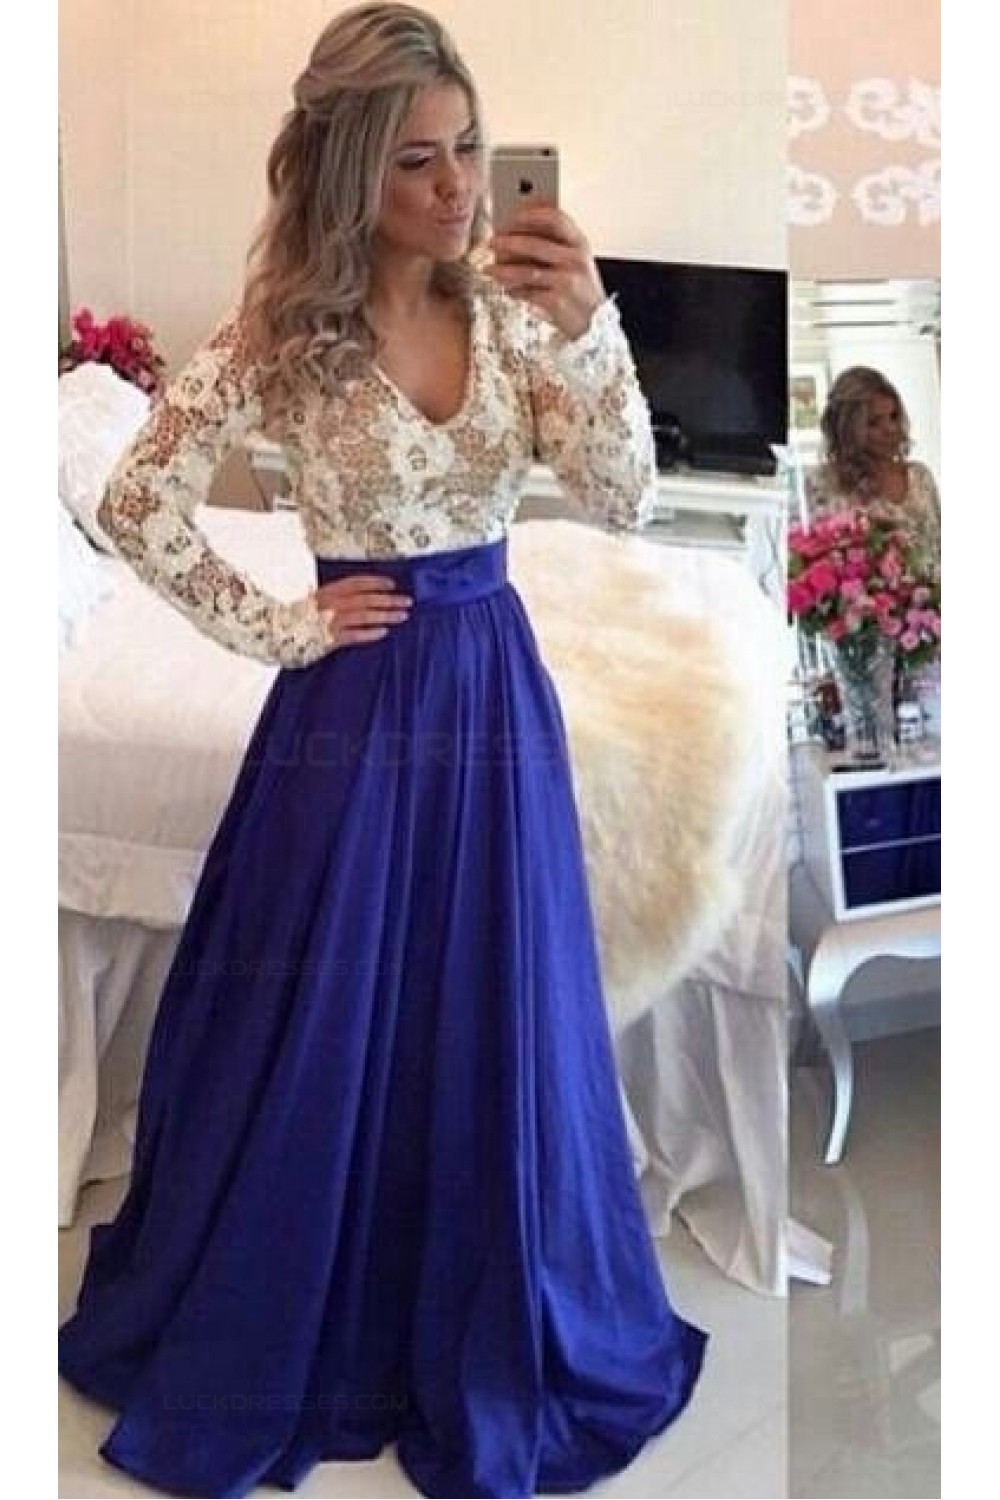 blue and white evening gown